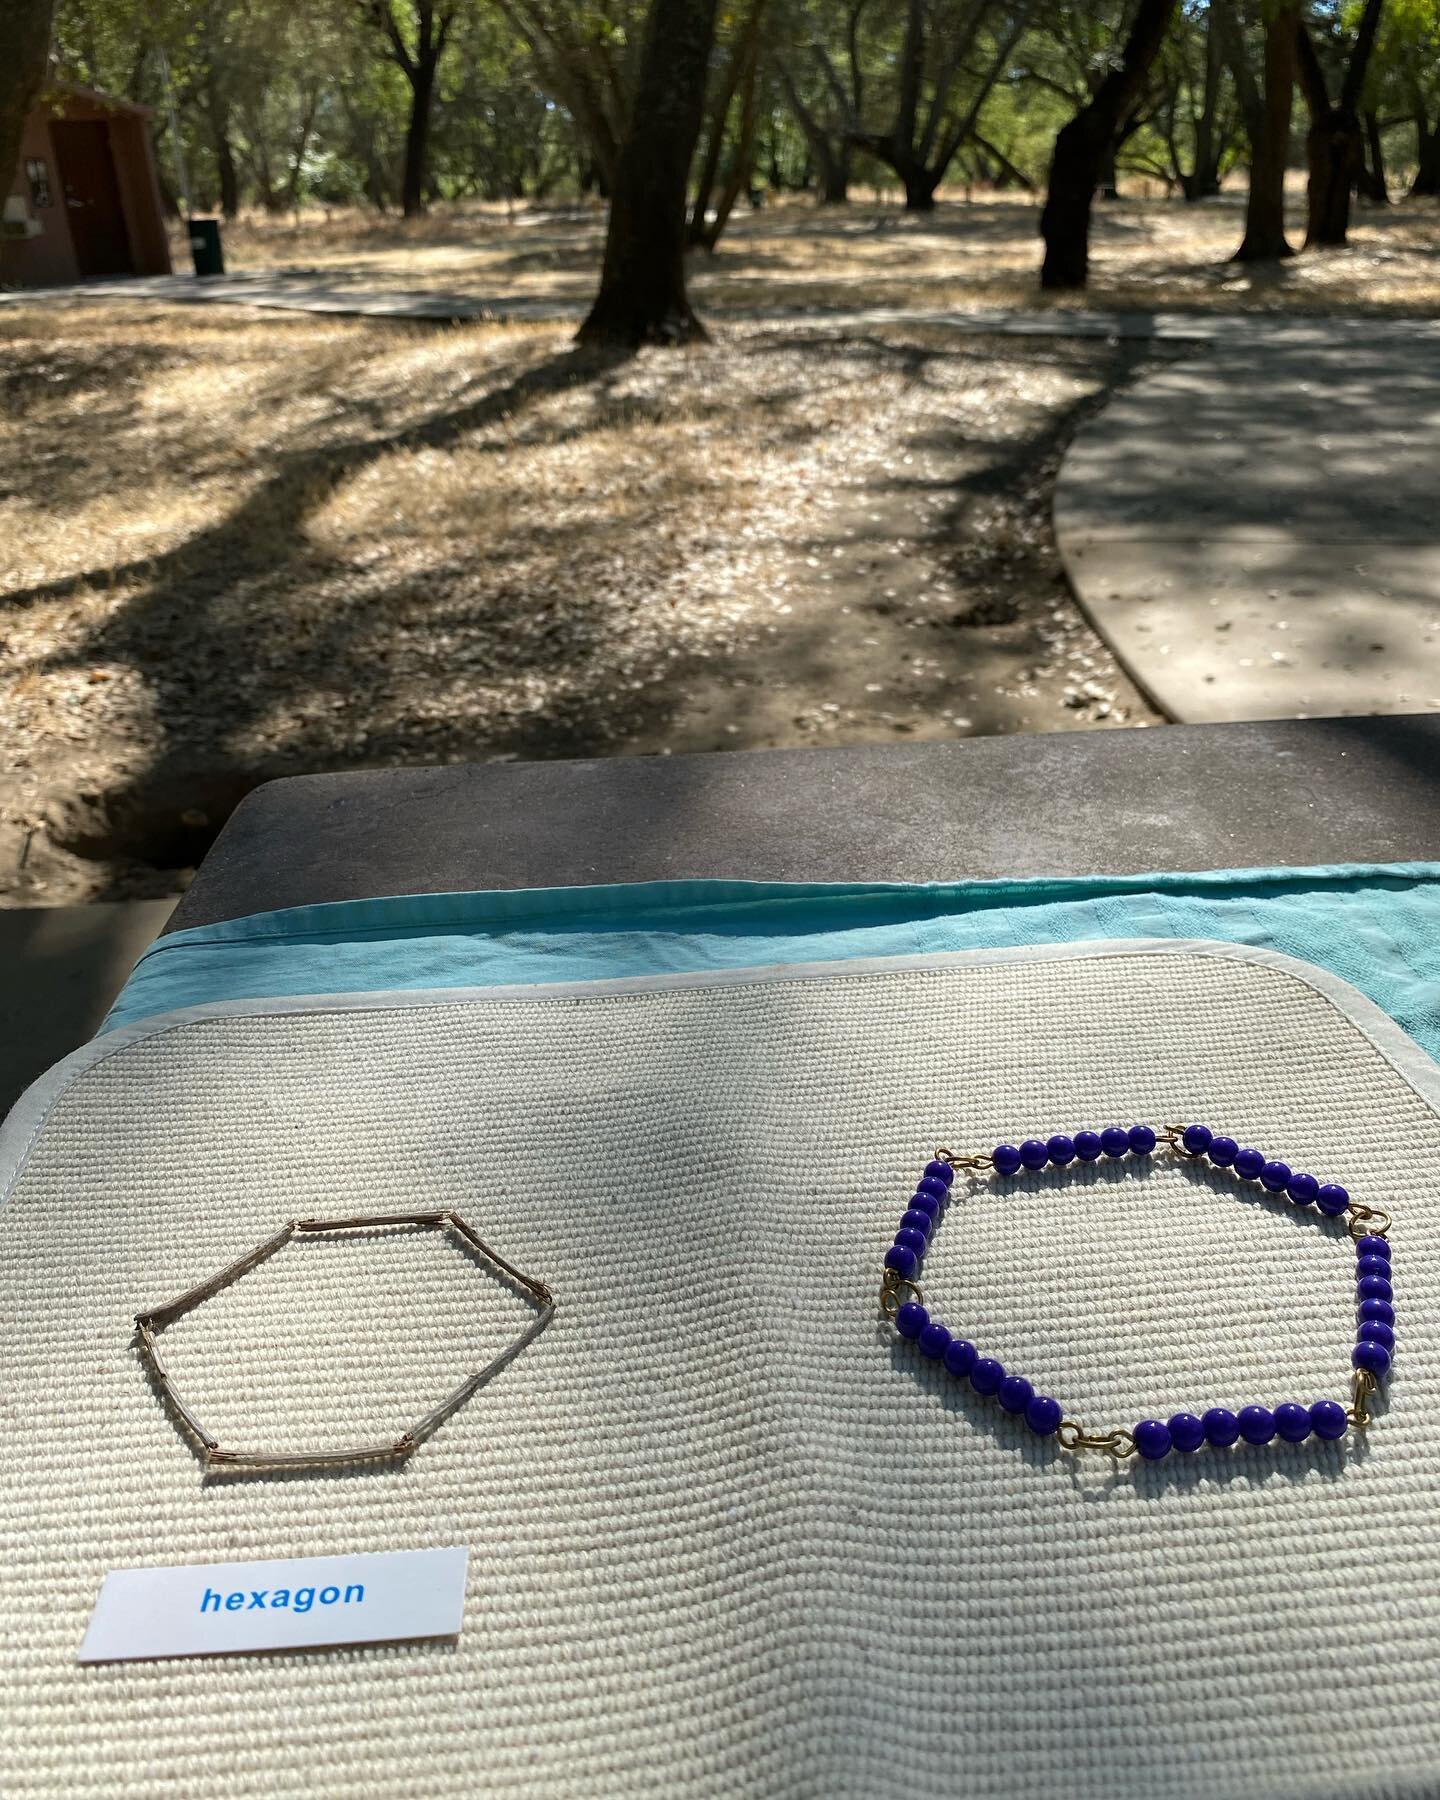 Building polygons with natural, found materials, the Geometric Cabinet form cards and short bead chains. 
🌾
#geometry #natureactivities #optoutside #montessoriinnature #forestschool #microschool #homeschool #experientiallearning #outdoorclassroom
🌾